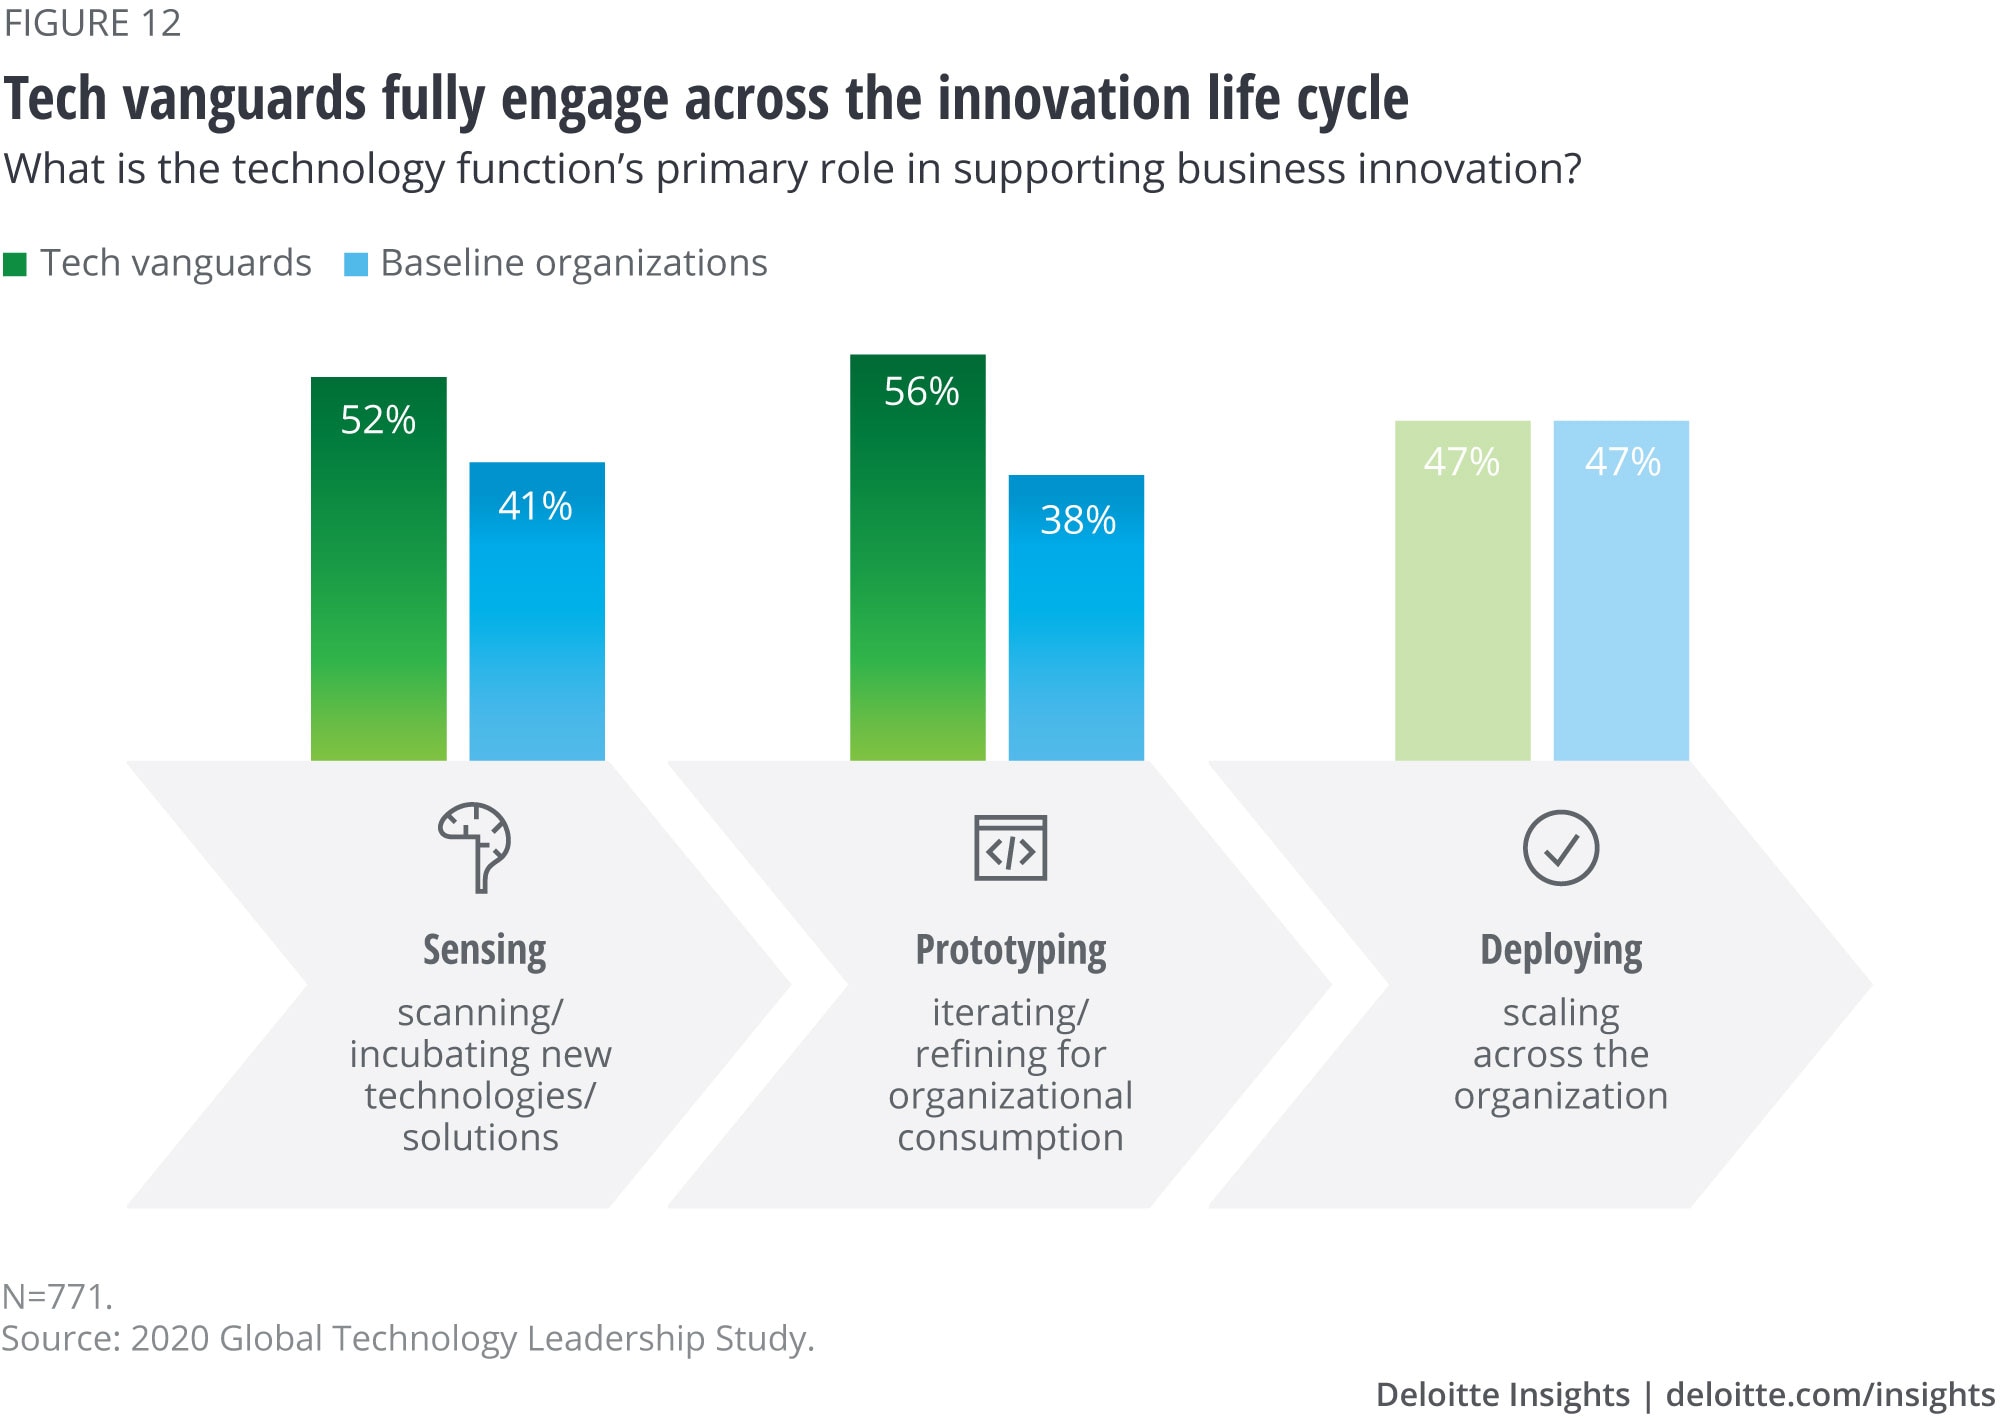 Tech vanguards fully engage across the innovation life cycle